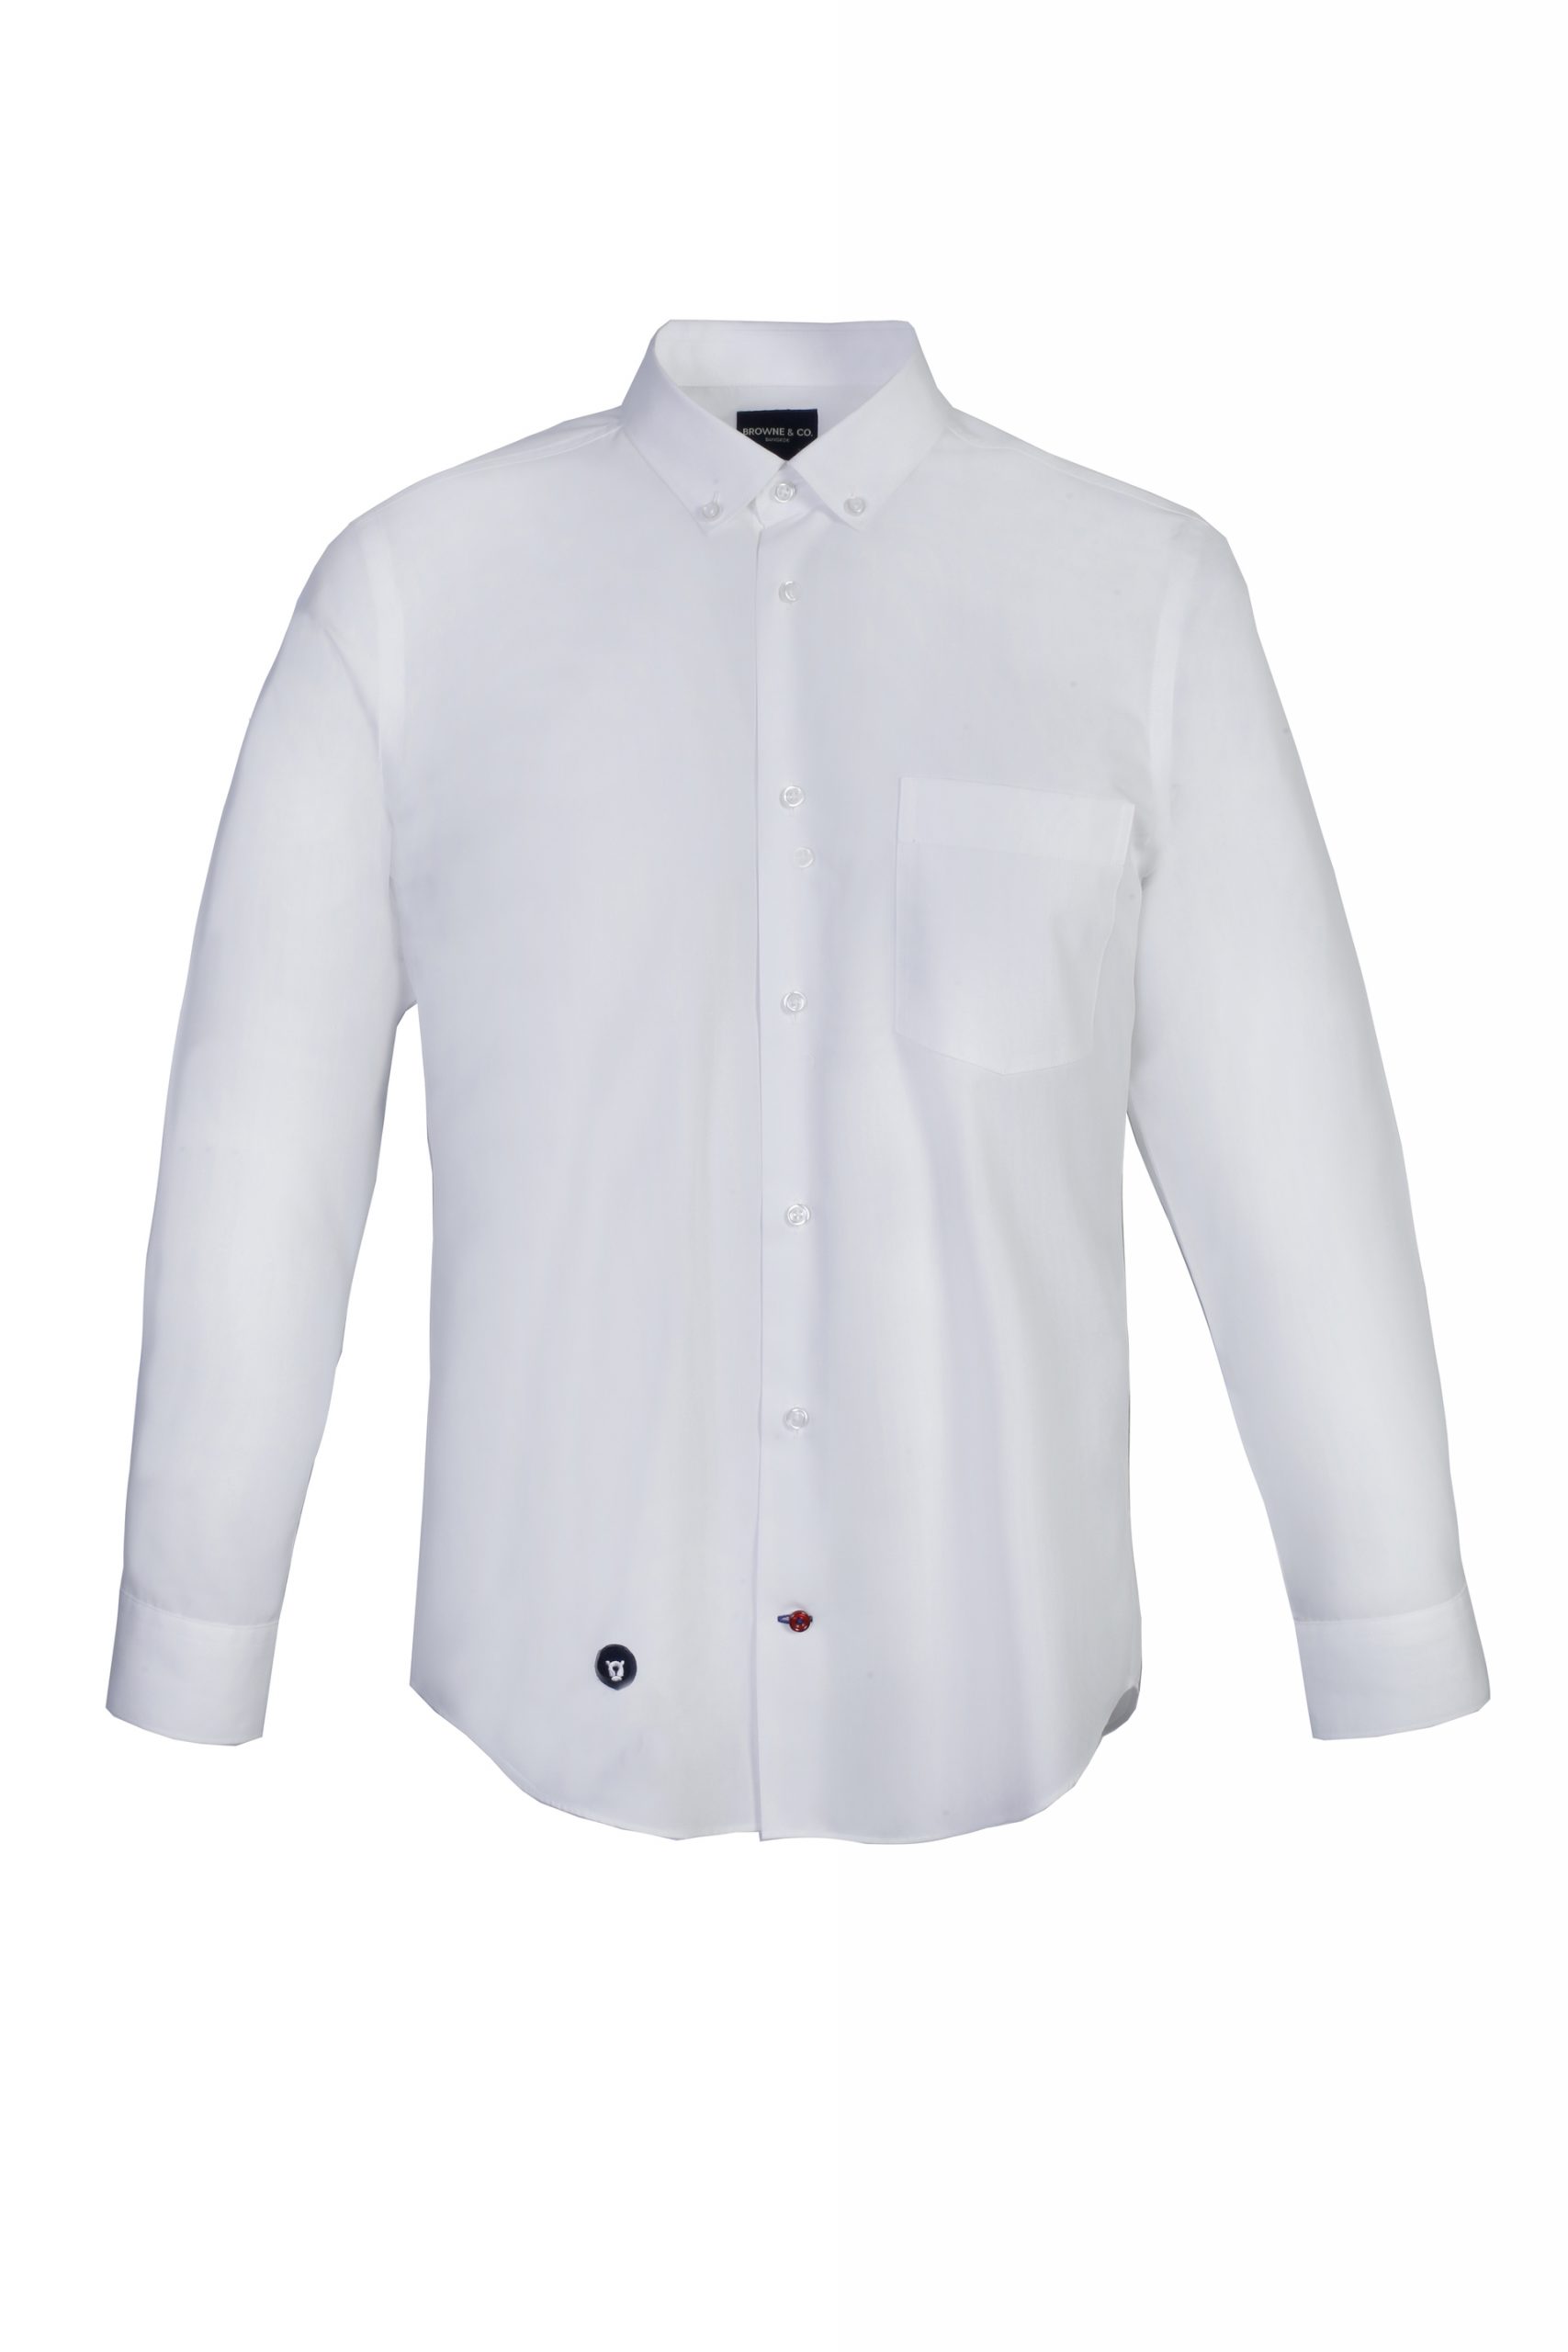 White Button Down Collar Long Sleeves Shirt with Pocket and Bottom Logo ...